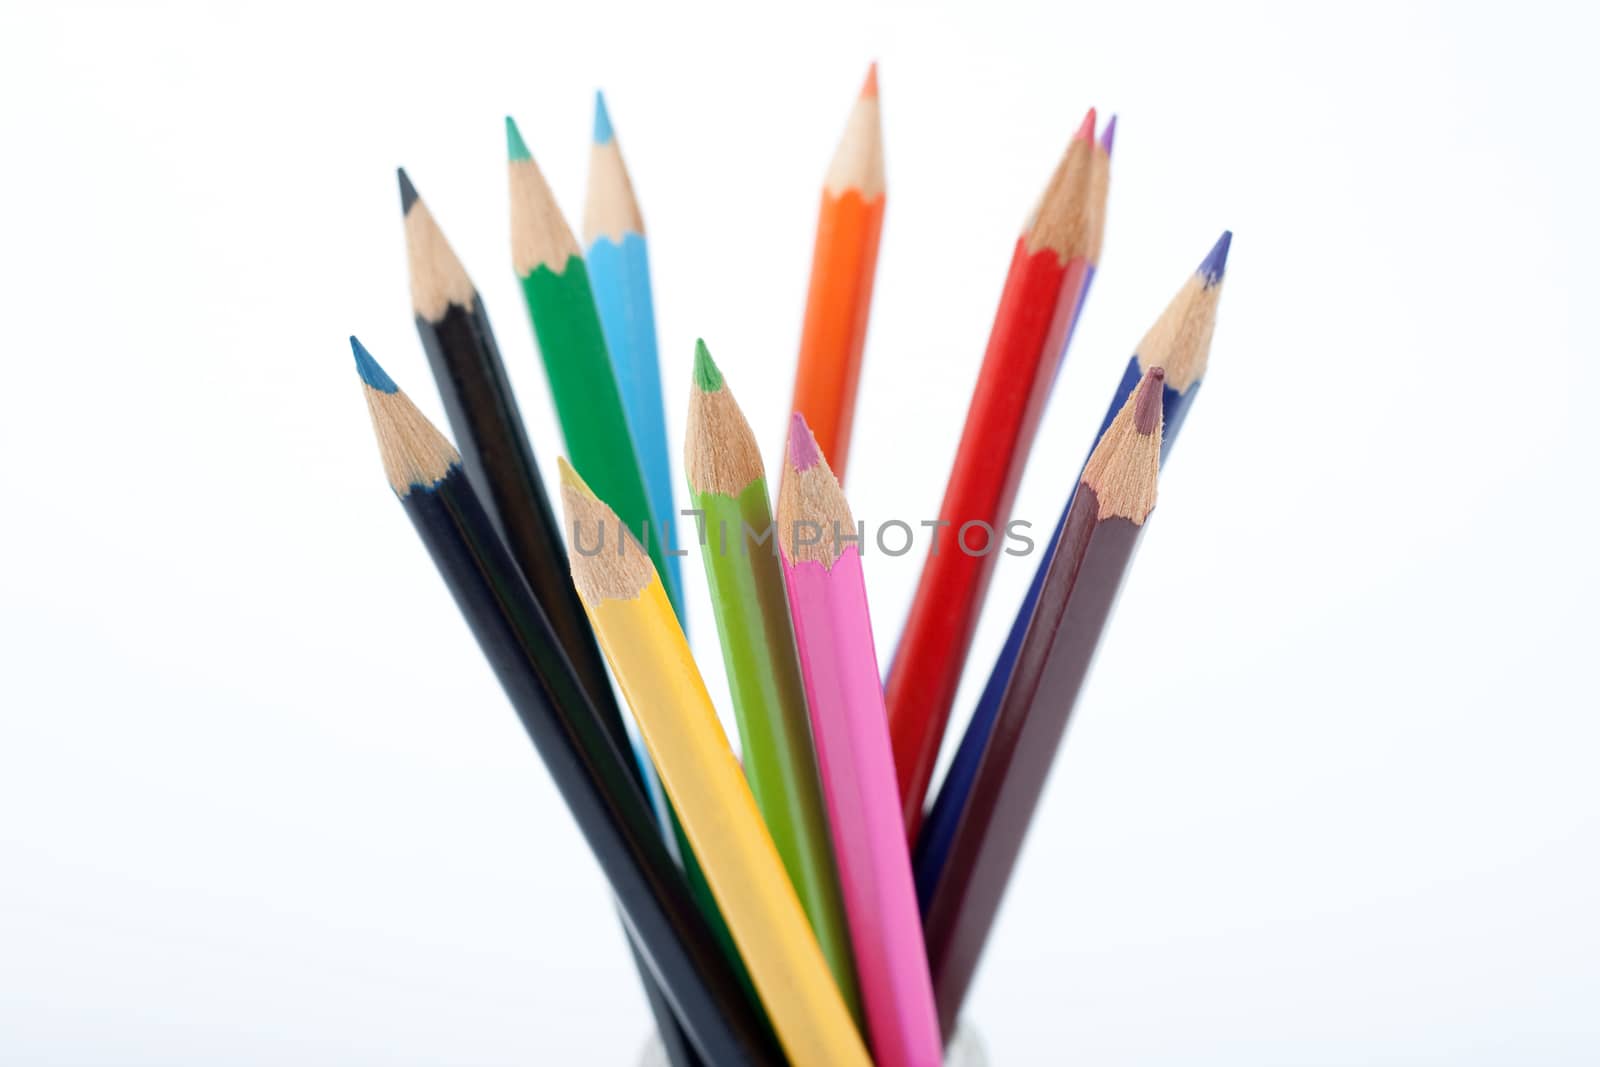 colored pencils standing upwords on white background